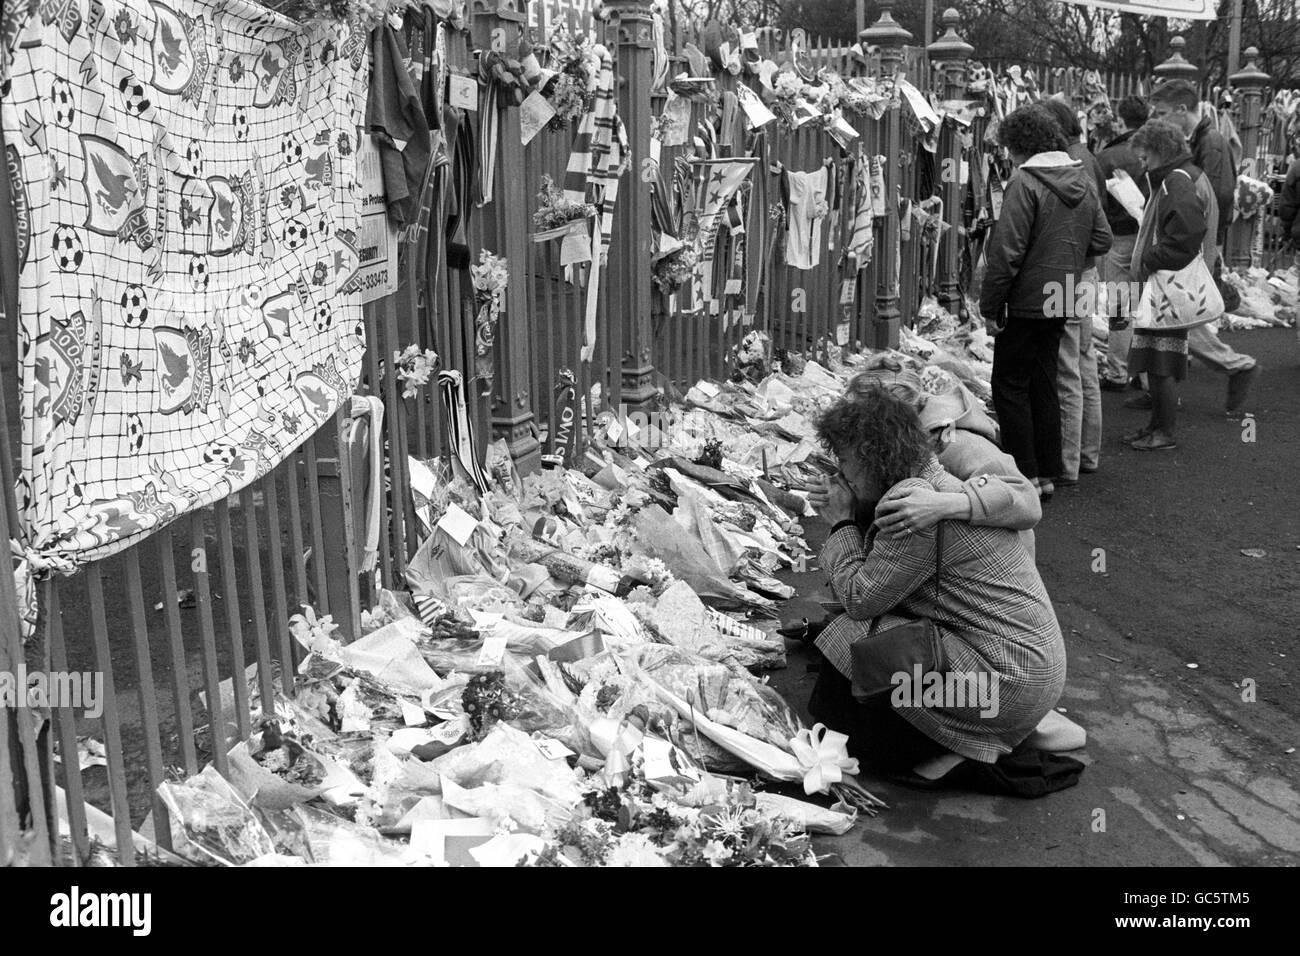 A WOMAN IS COMFORTED AS SHE KNEELS BY FLORAL TRIBUTES AT THE GATE OF THE HILLSBOROUGH GROUND, SHEFFIELD, THE MORNING AFTER NINETY SIX LIVERPOOL FANS DIED FROM INJURIES SUFFERED IN THE FATAL CRUSH AT THE GROUND. Stock Photo